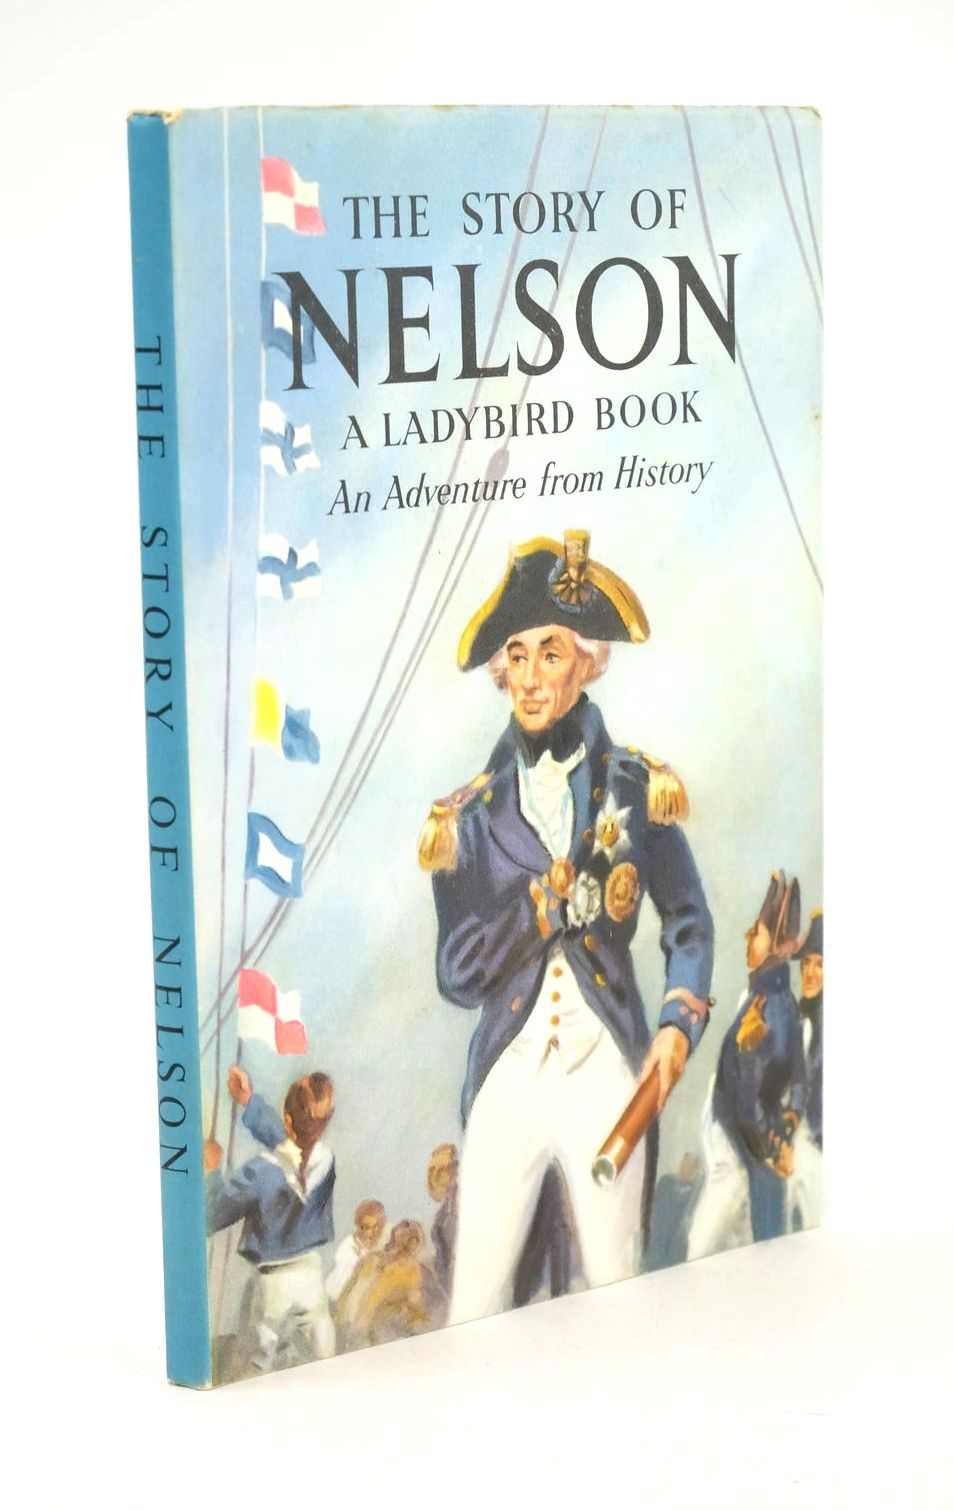 Photo of THE STORY OF NELSON written by Peach, L. Du Garde illustrated by Kenney, John published by Wills & Hepworth Ltd. (STOCK CODE: 1324676)  for sale by Stella & Rose's Books